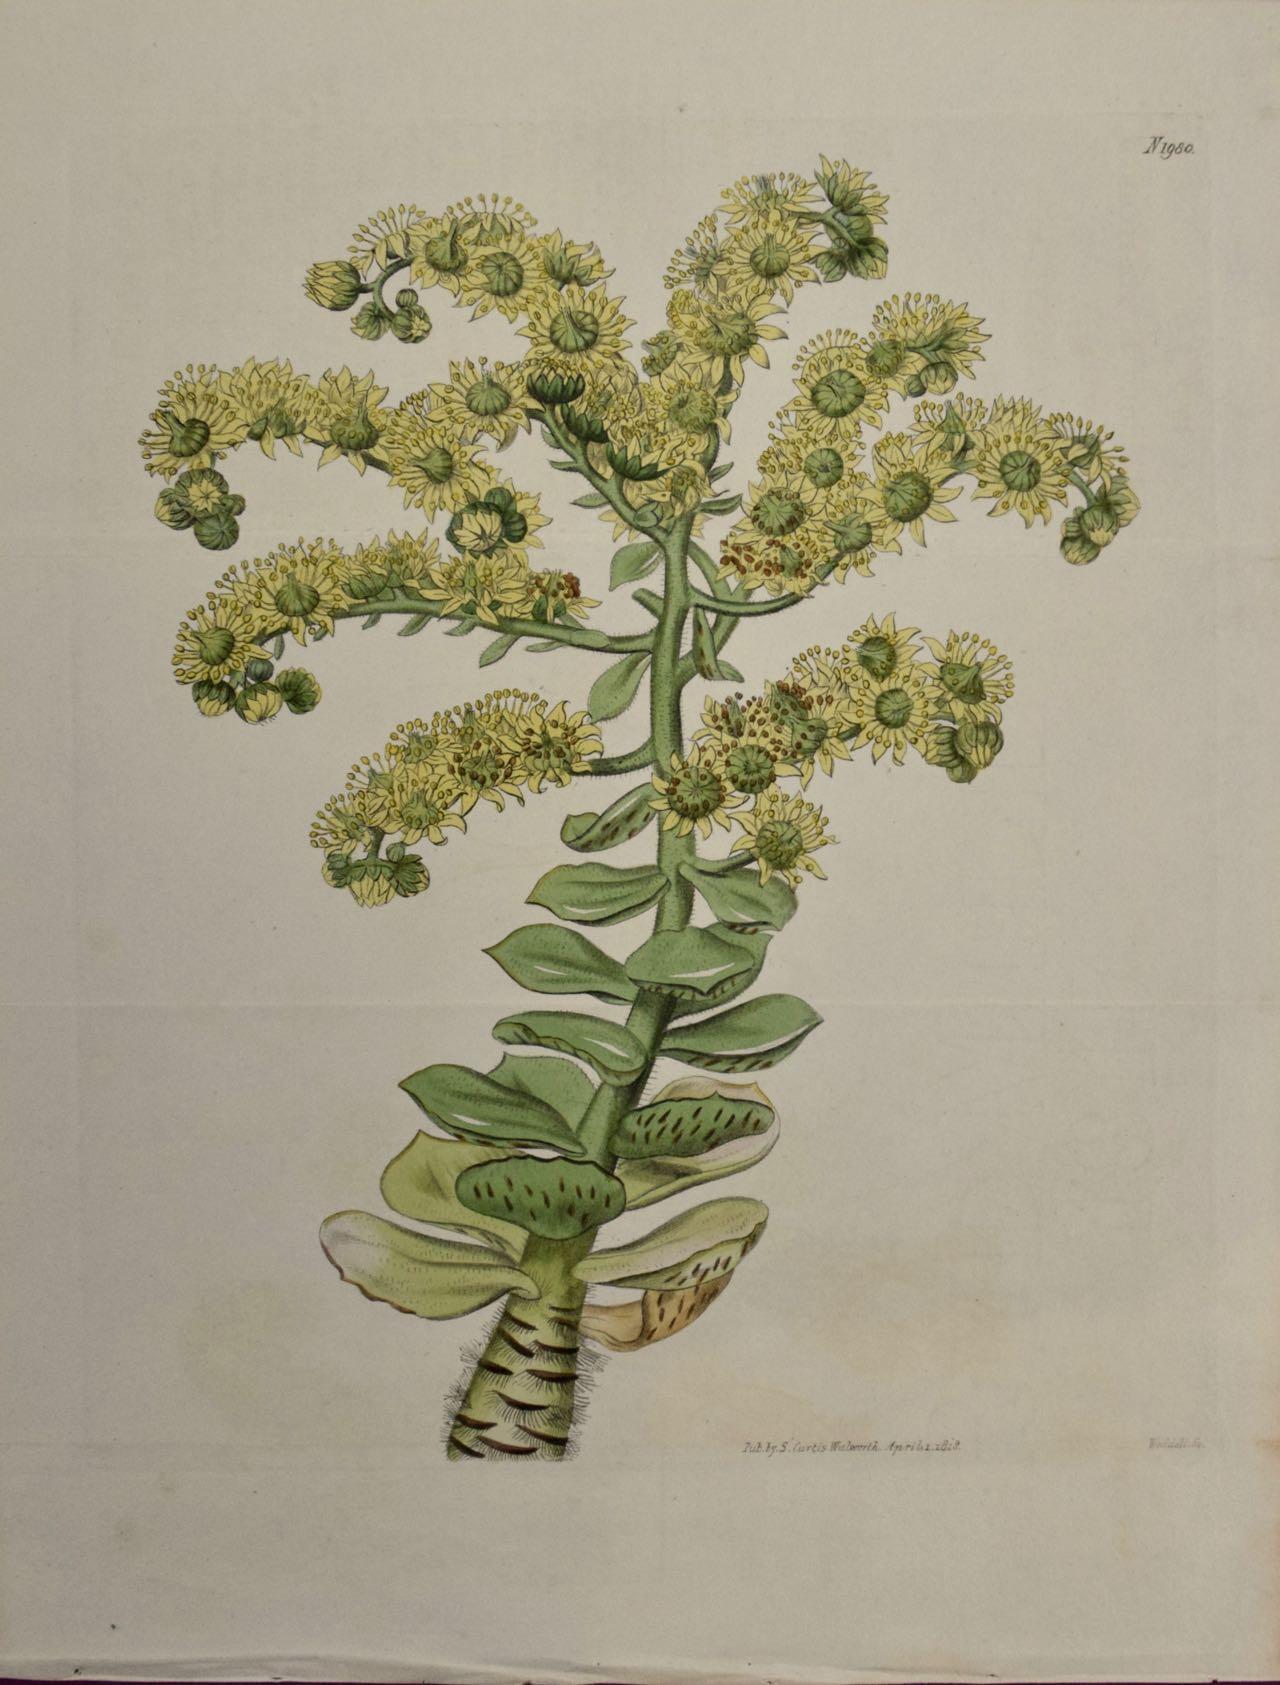 William Curtis Landscape Print - Flowering Houseleek Plant: A 19th C. Hand-colored Botanical Engraving by Curtis